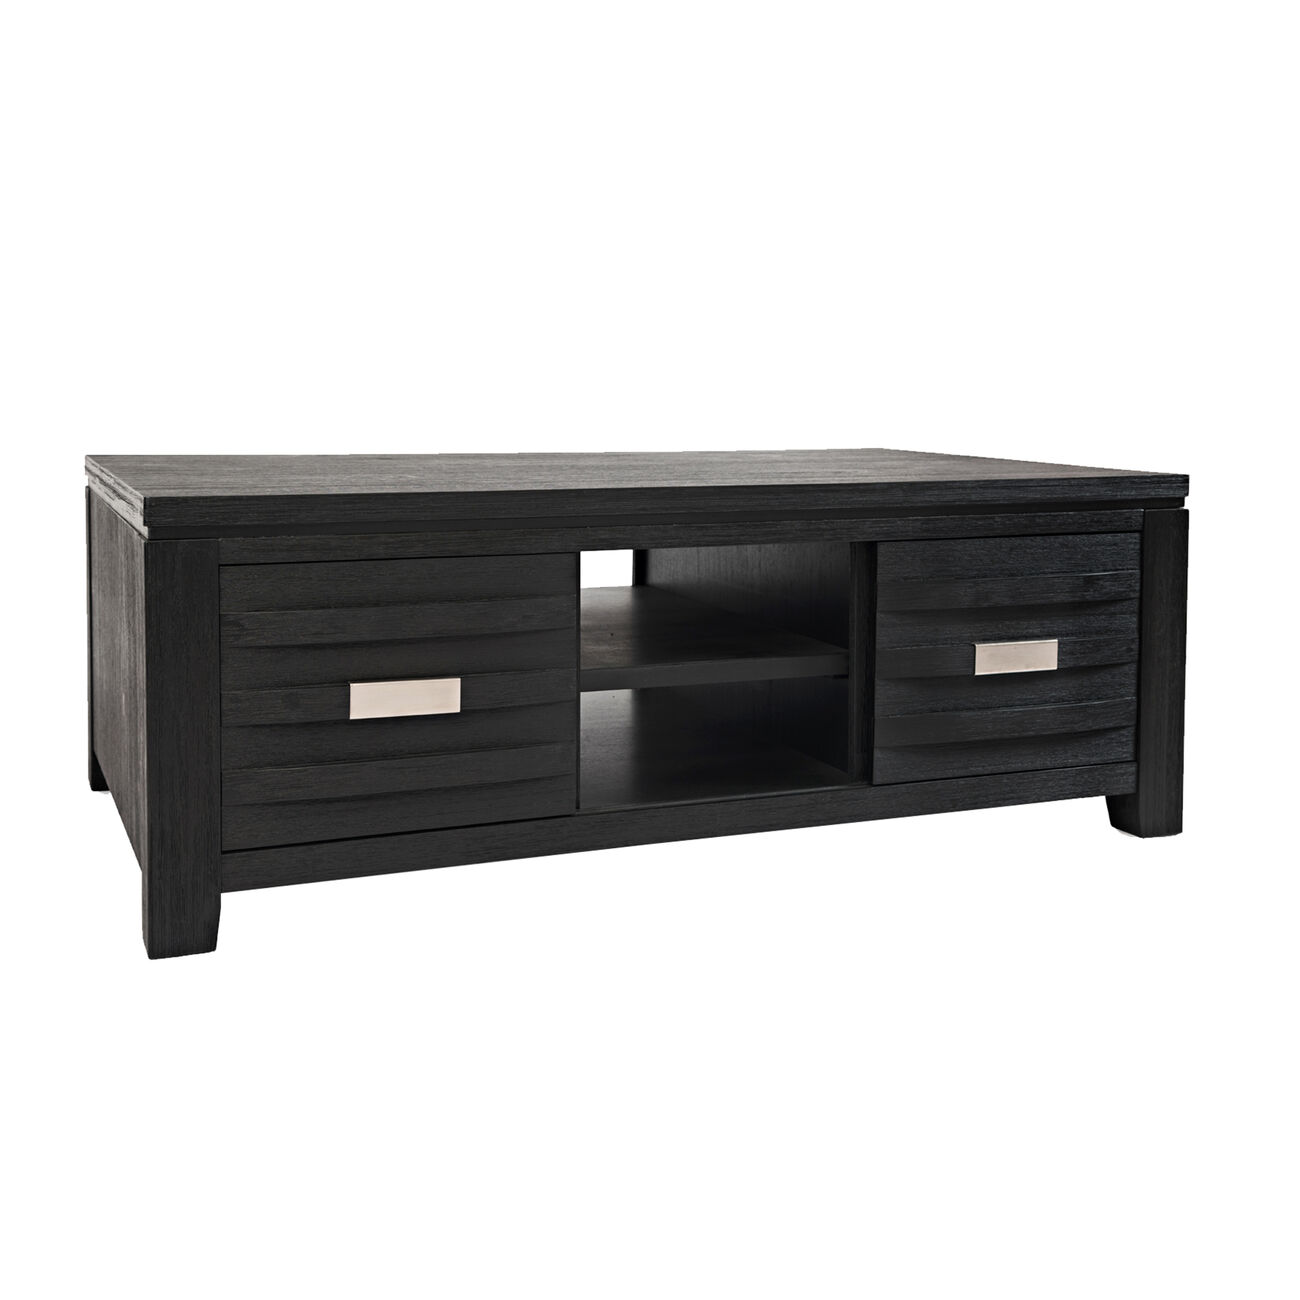 Wooden Cocktail Table with Sliding Door and Center Shelf, Dark Gray